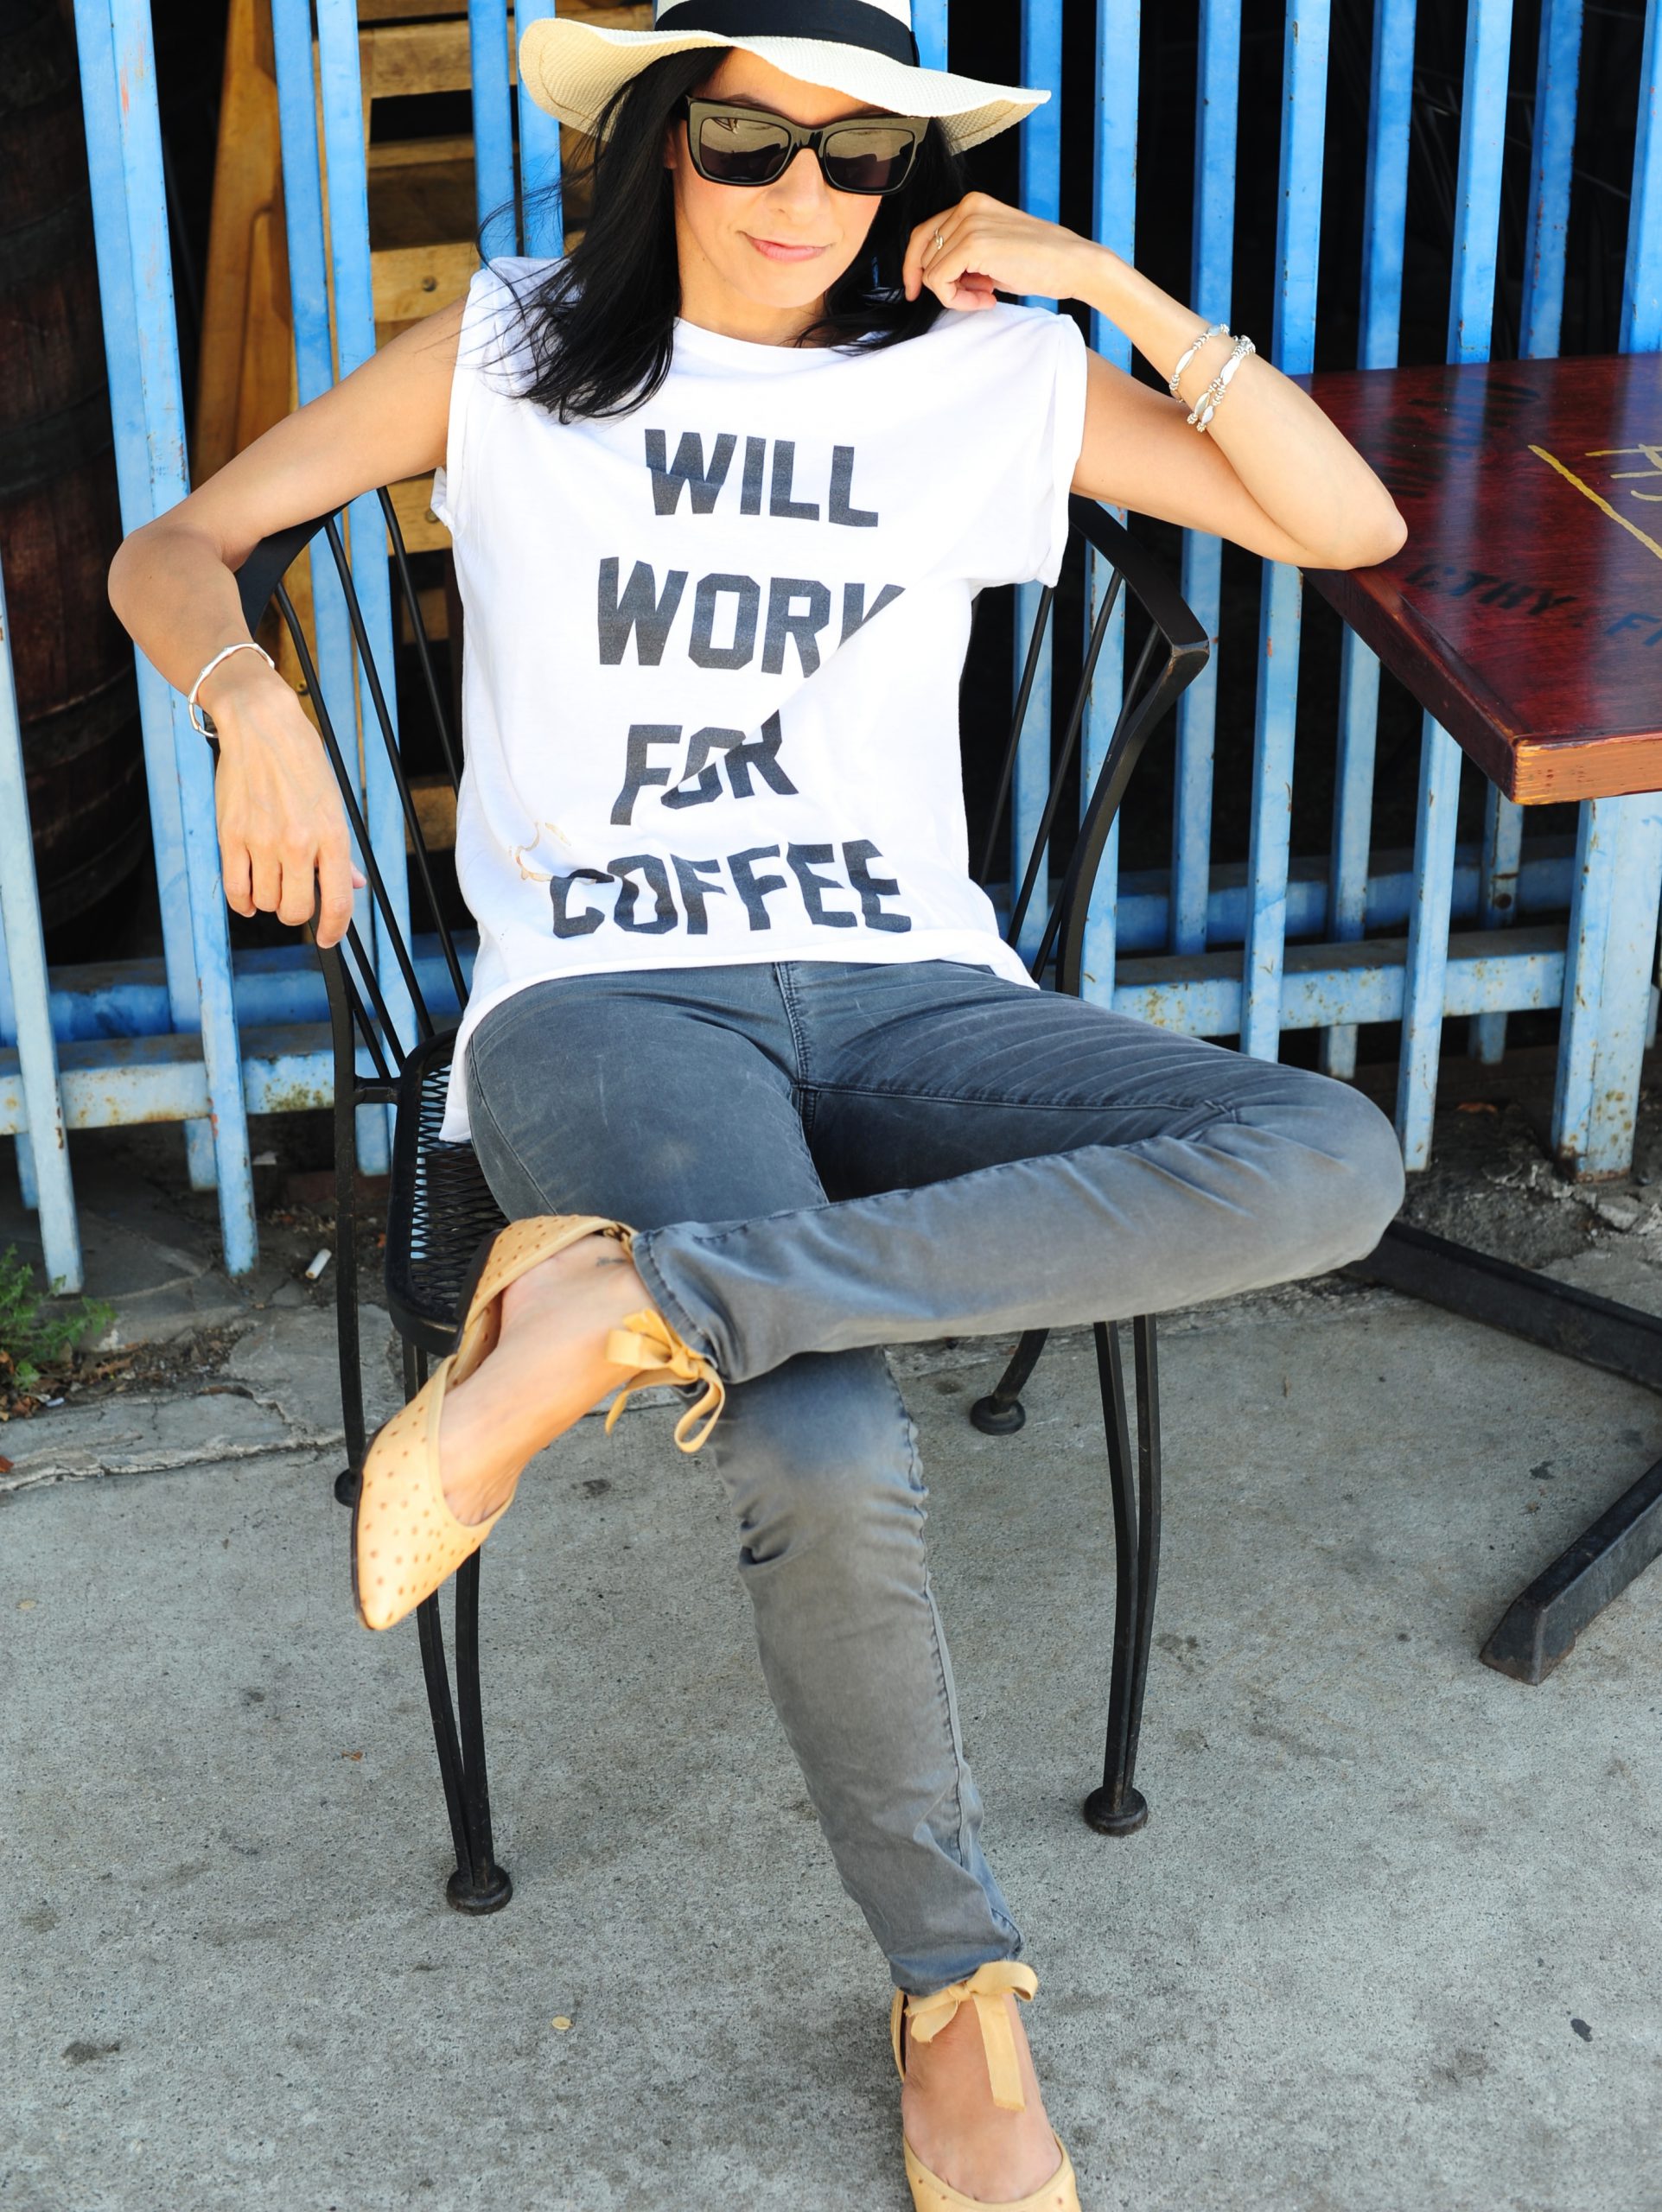 coffee shop etiquette - will work for coffee - the laundry room tee